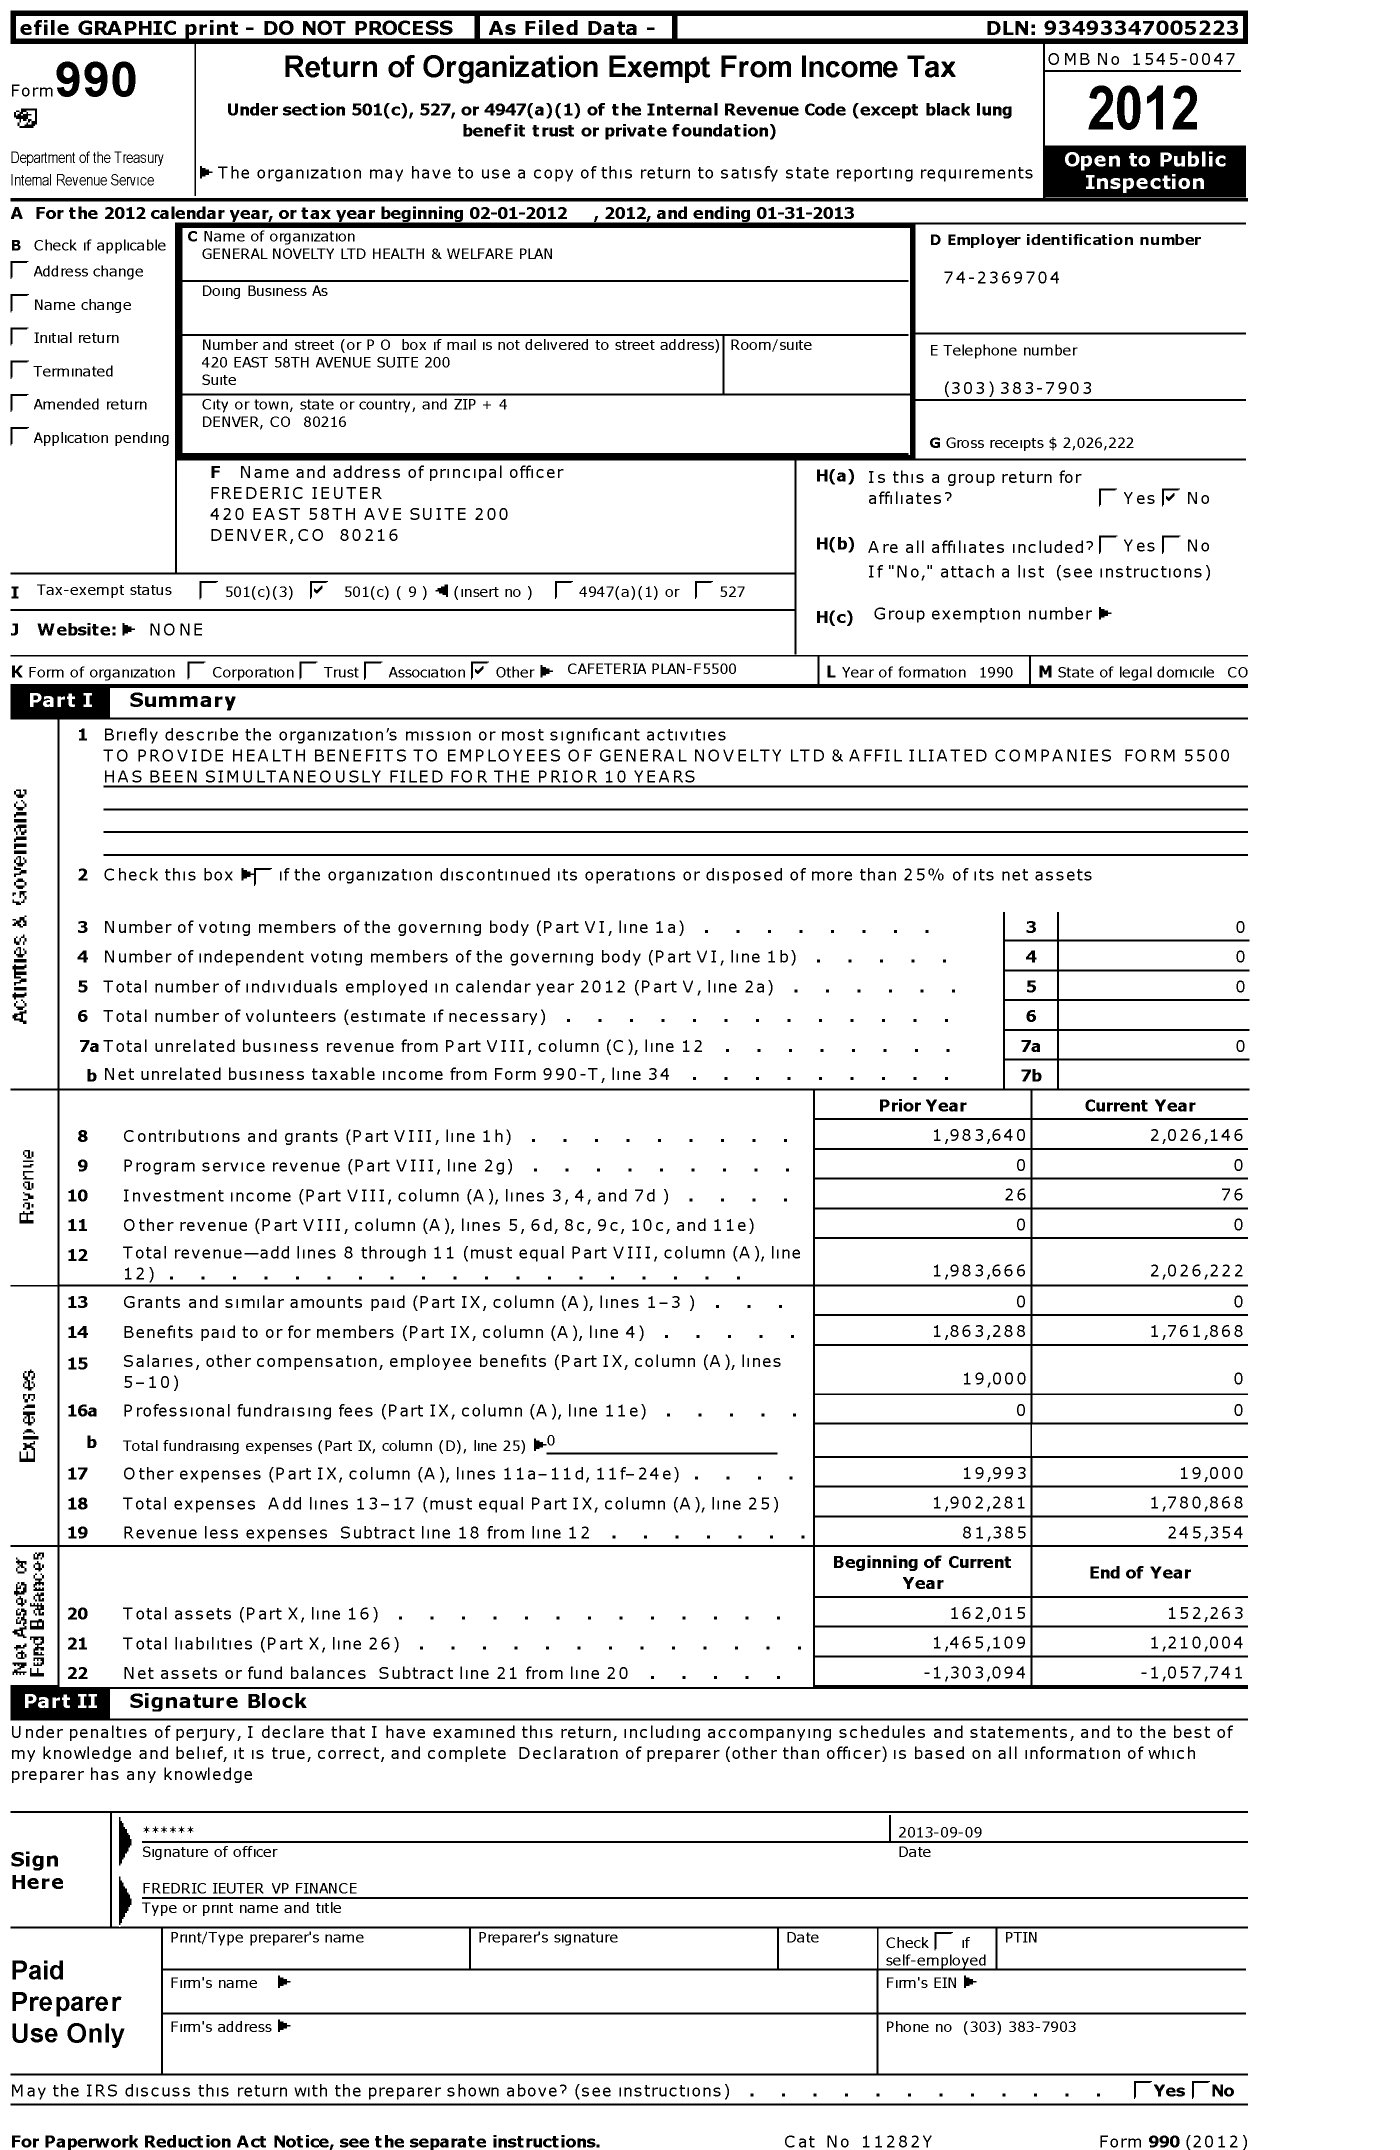 Image of first page of 2012 Form 990O for General Novelty Health and Welfare Plan